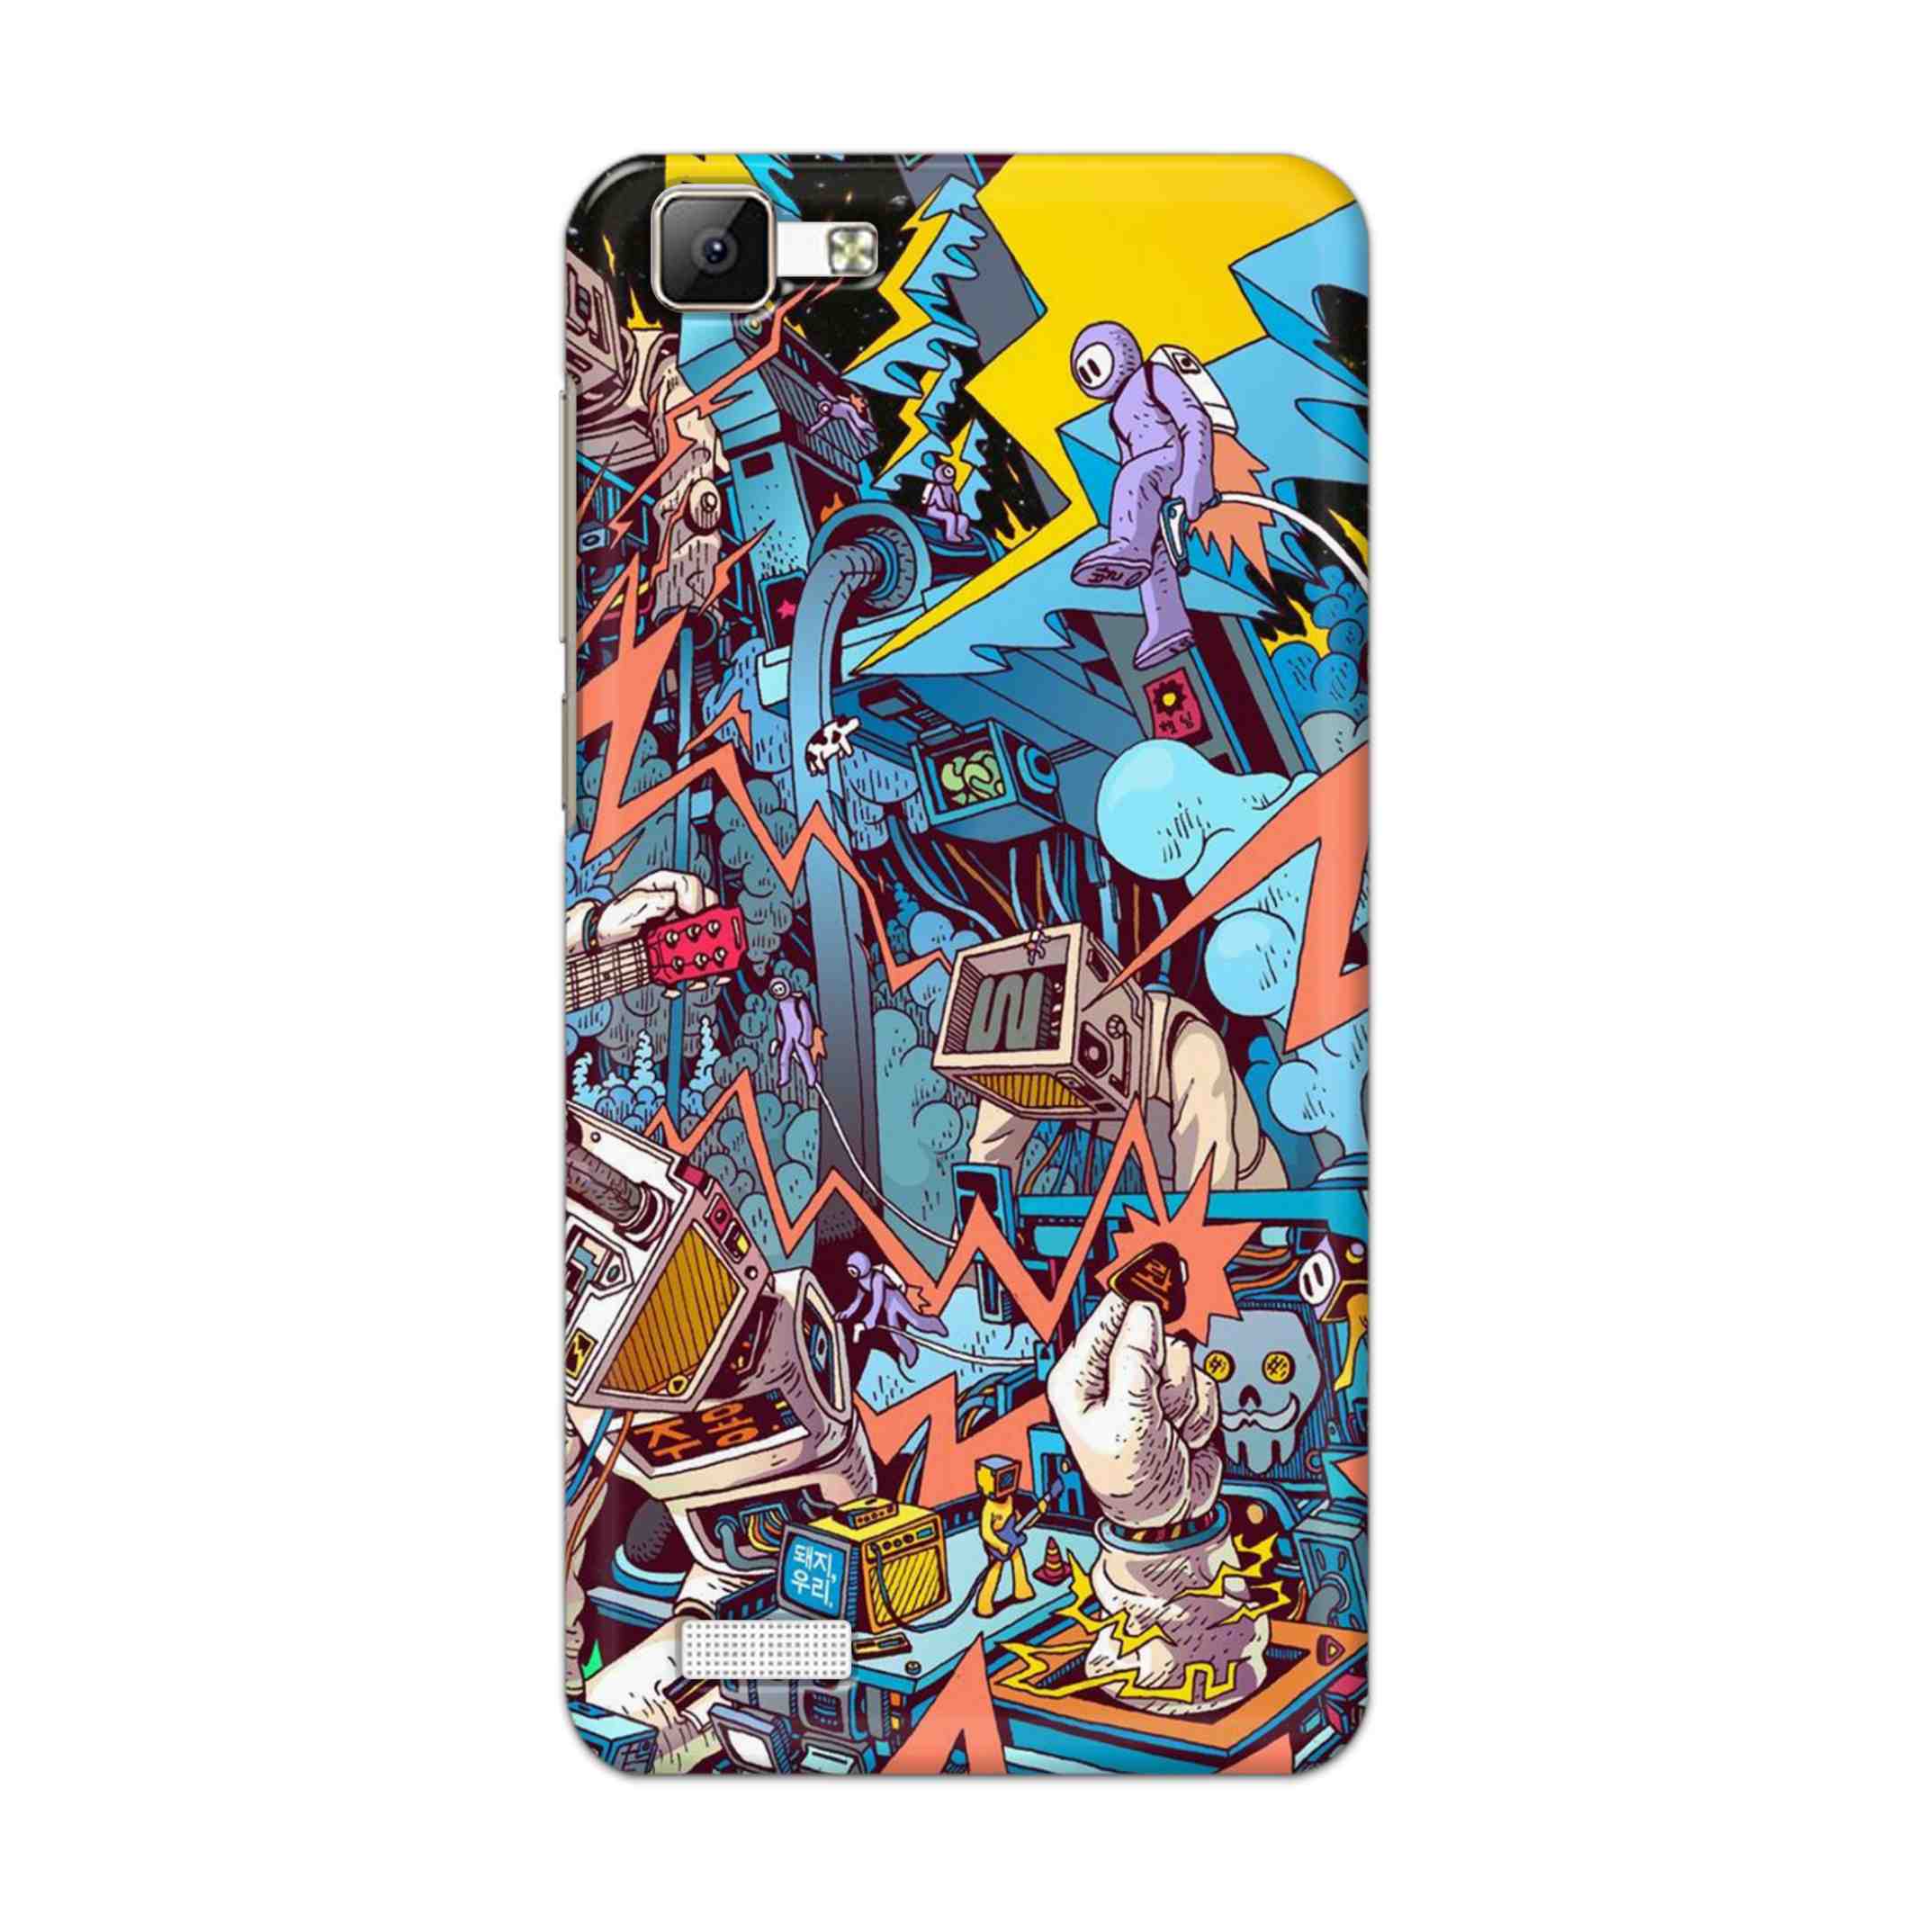 Buy Ofo Panic Hard Back Mobile Phone Case Cover For Vivo Y35 Online